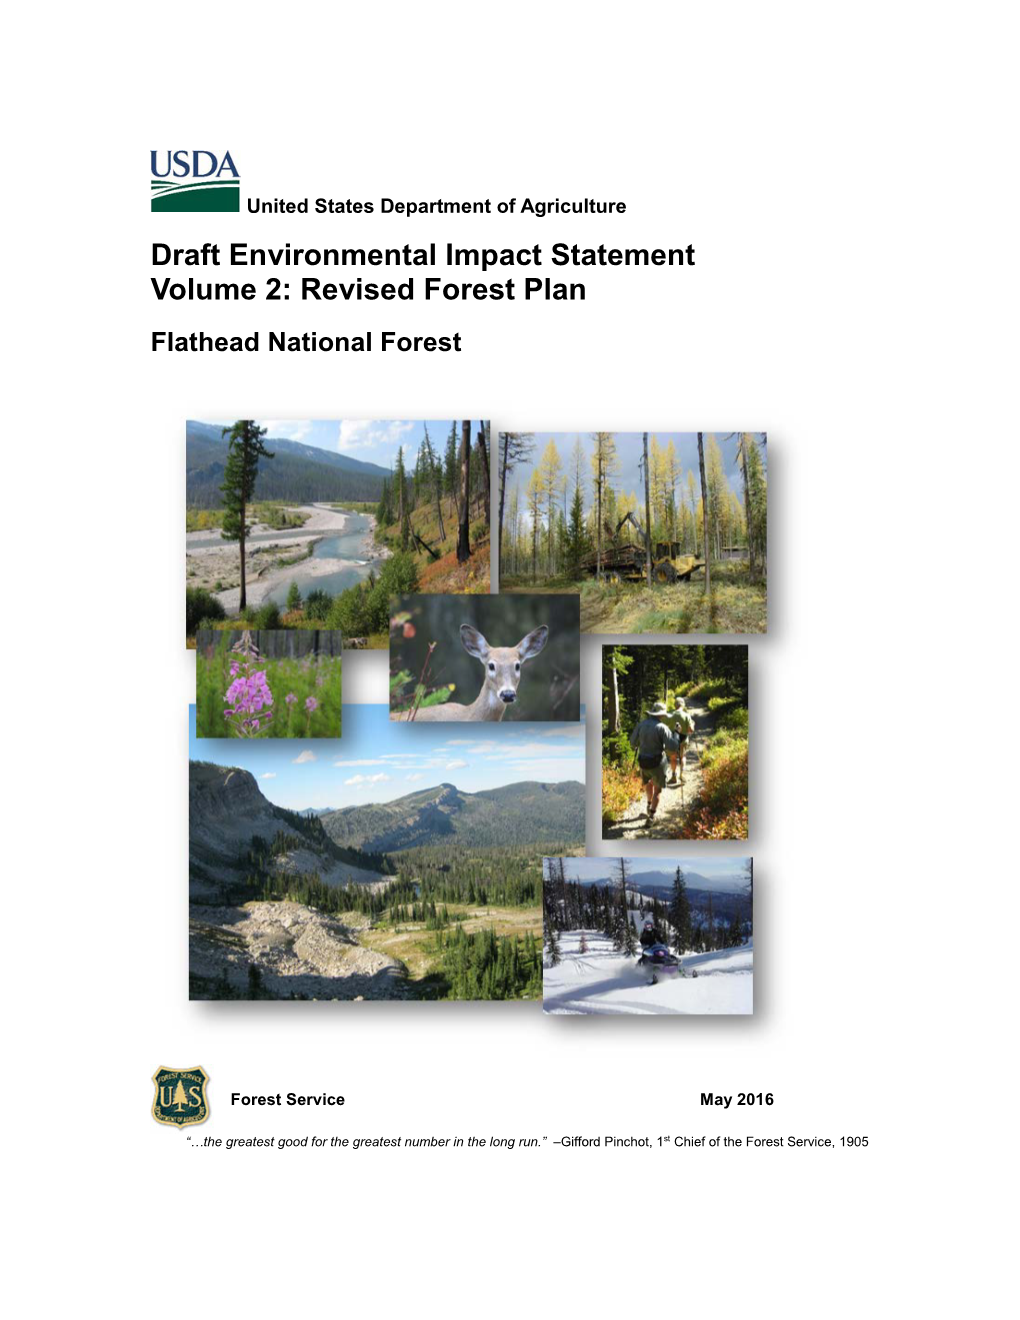 Volume 2 of the Flathead National Forest DEIS for the Revised Forest Plan